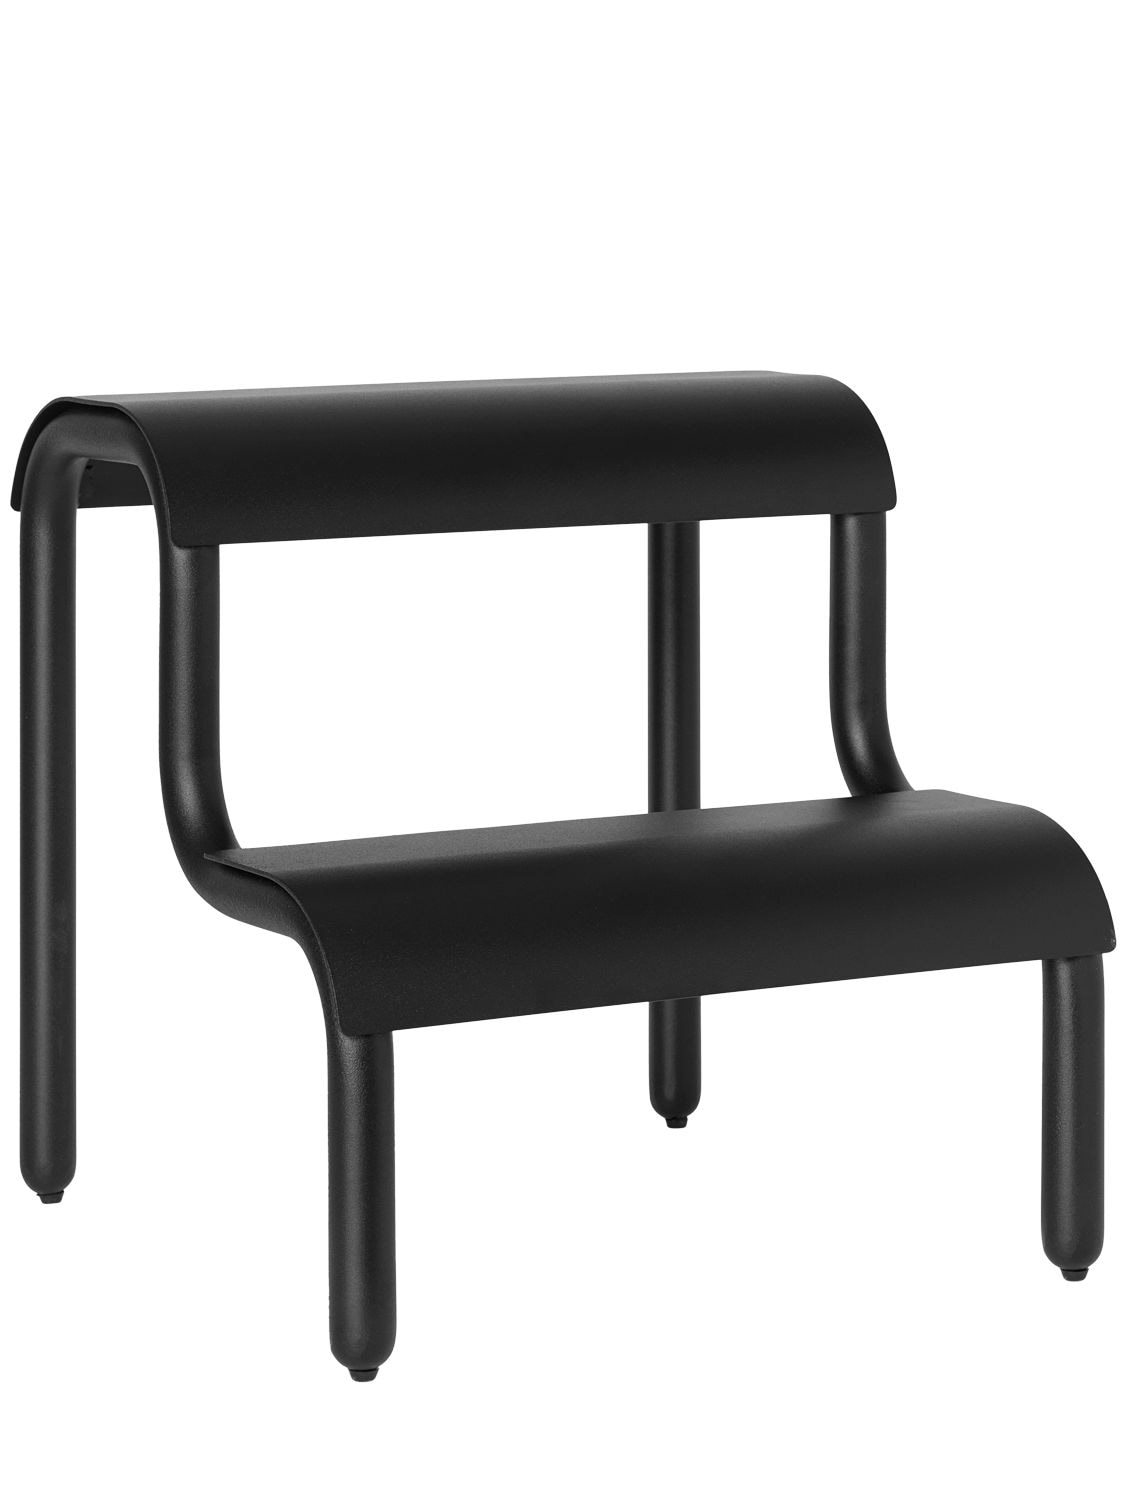 Image of Up Step Stool